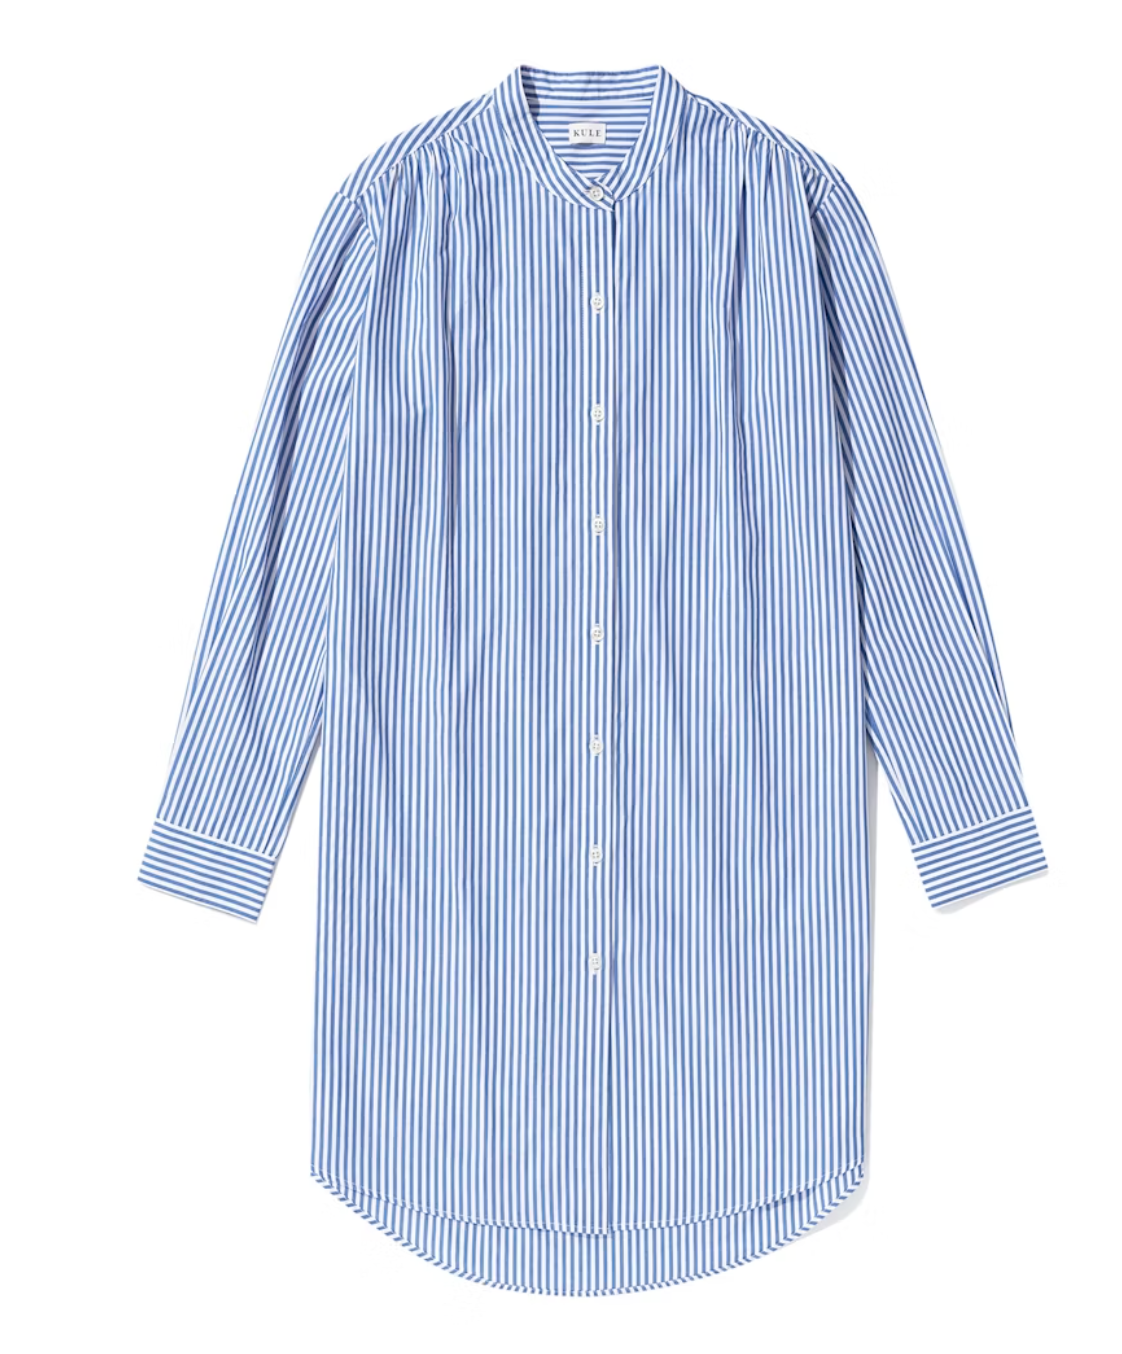 A long-sleeved men's shirt displaying thin blue vertical stripes, buttoned front, laid flat against a white background in a Scottsdale Arizona bungalow. The Helena Royal Blue/White by Kule.